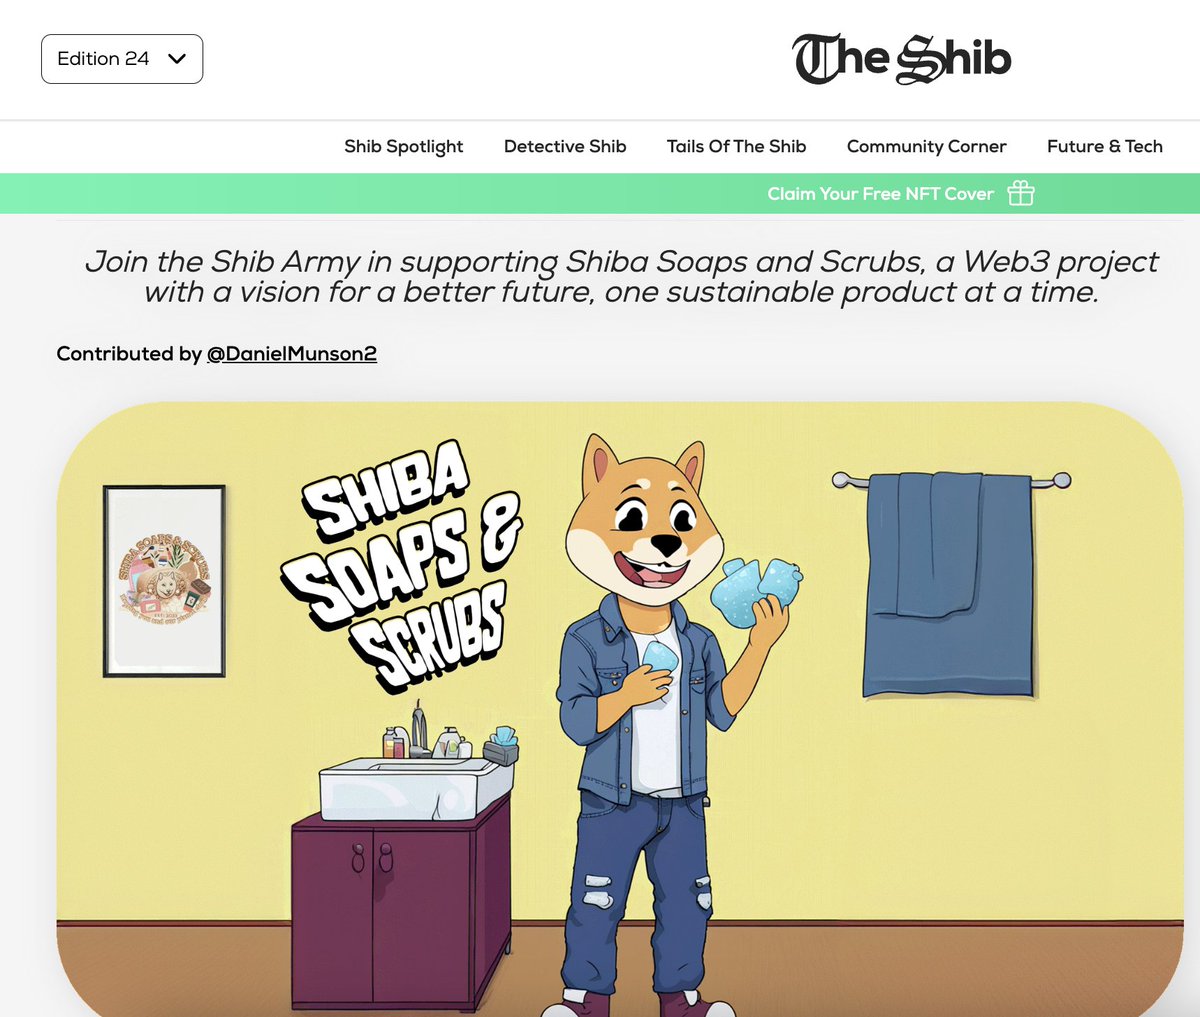 OMG! Another great shib magazine edition today! And @ShibaSoaps is in @TheShibmagazine, a moment we all waited for. So awesome and bubbling. Thank you so much, @TheShibmagazine. I know @DanielMunson2 is having some happy tears rn. magazine.shib.io/article/66449b…